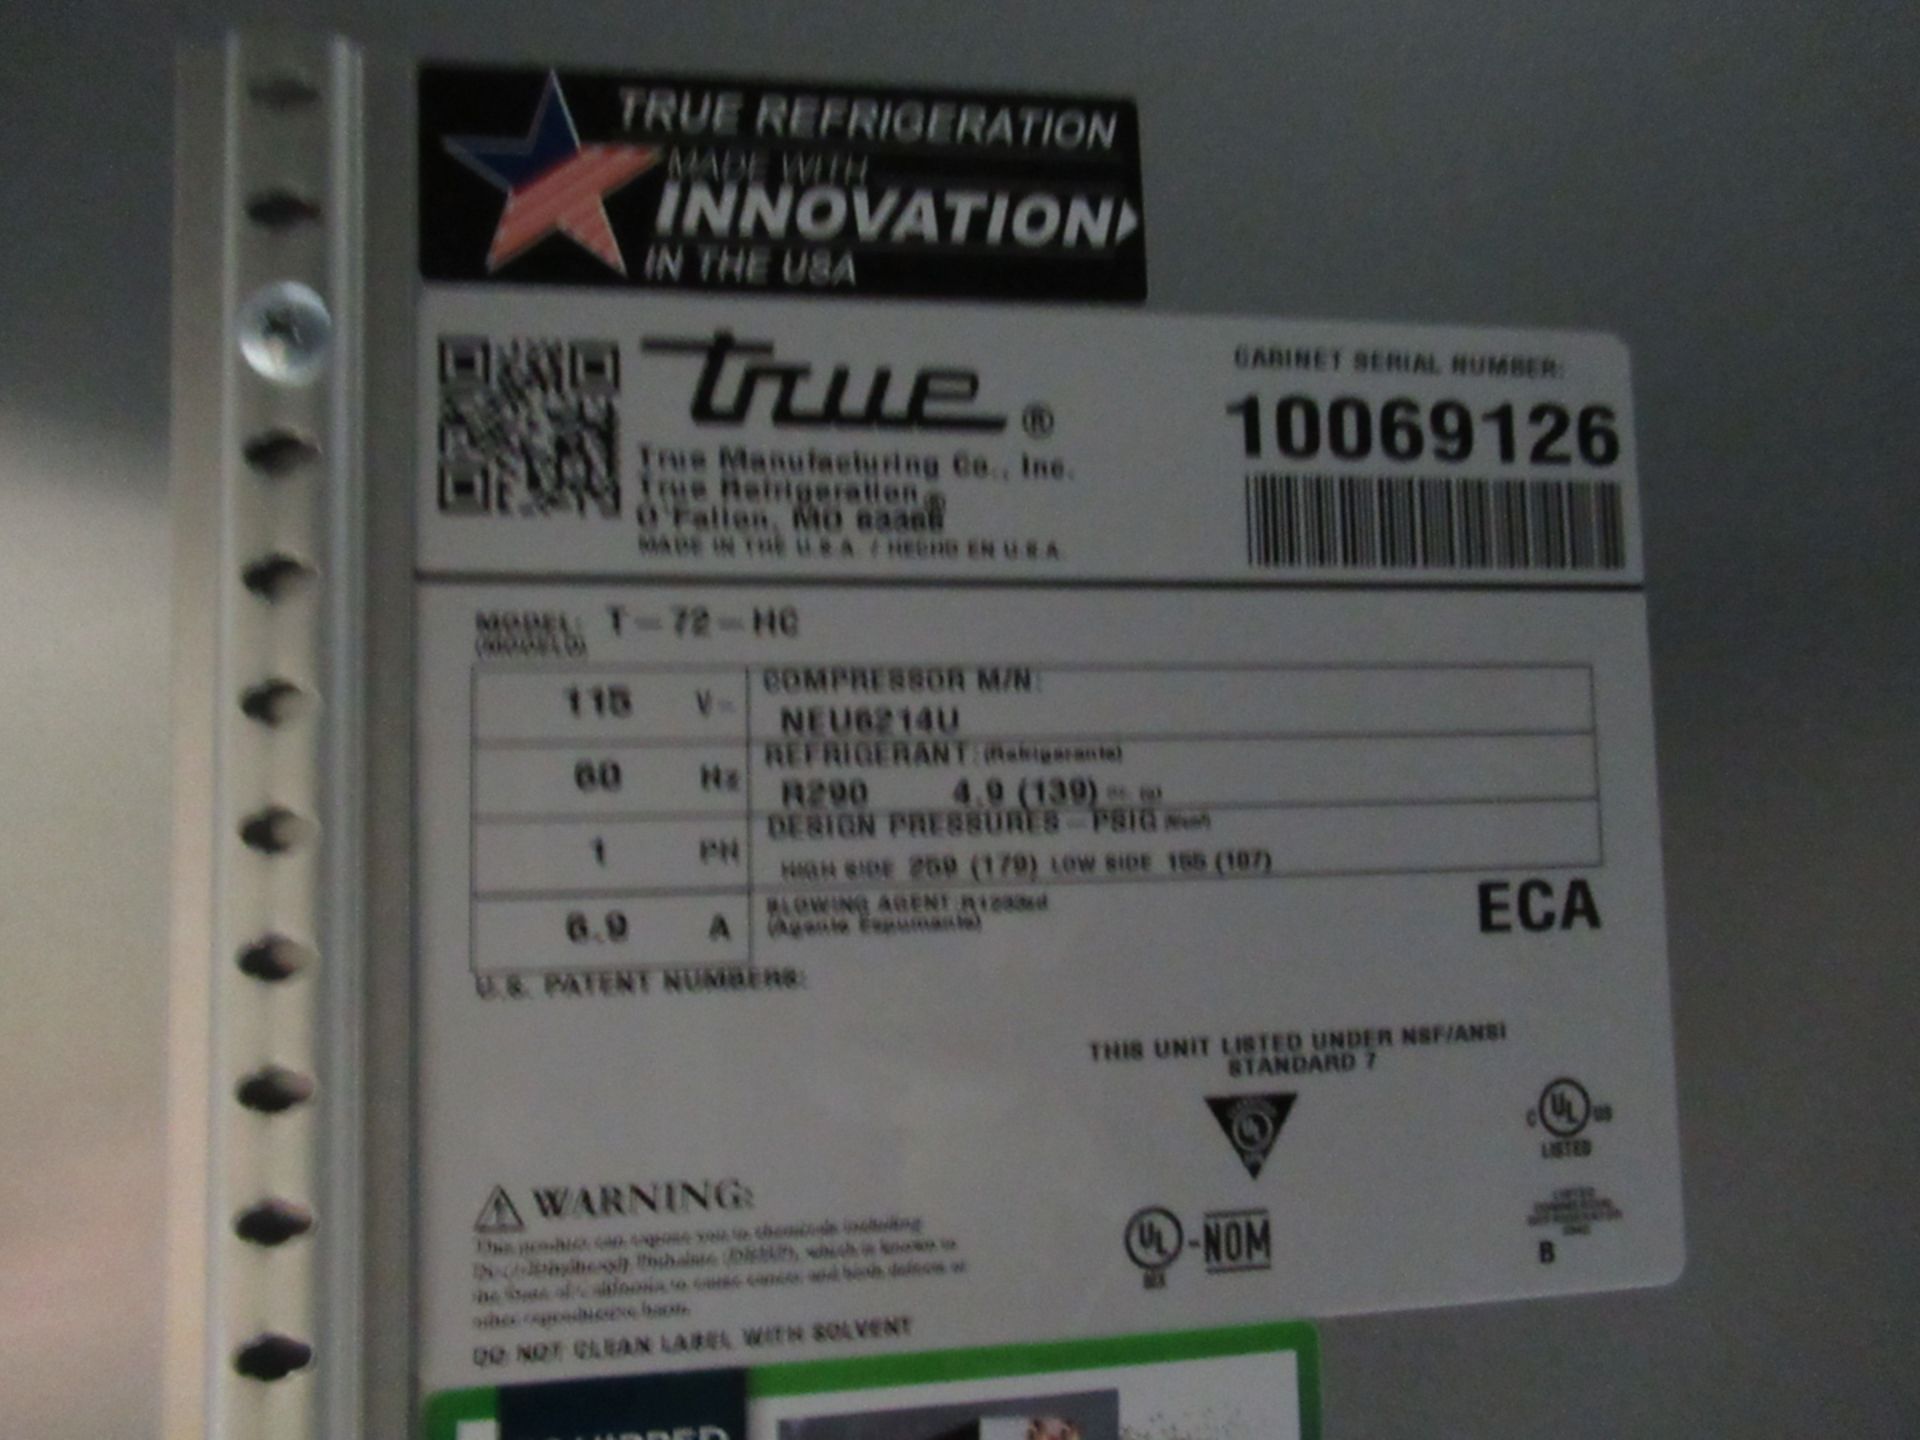 TRUE T-72-HC 78 1/10" THREE SECTION REACH IN REFRIGERATOR, S/N: 10069126 - Image 2 of 3